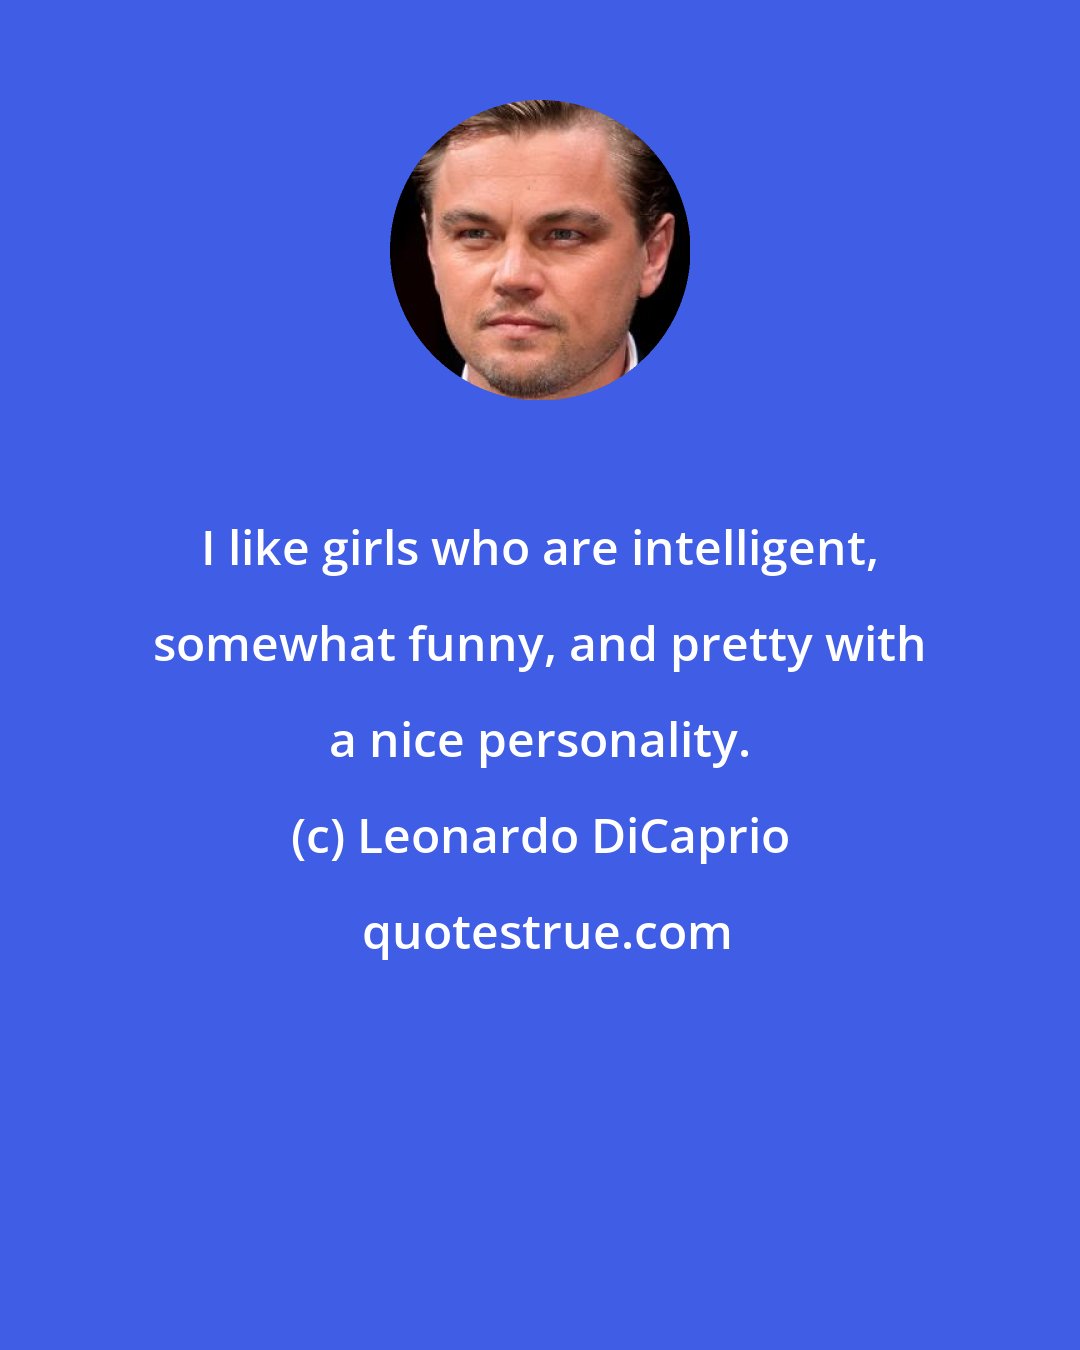 Leonardo DiCaprio: I like girls who are intelligent, somewhat funny, and pretty with a nice personality.